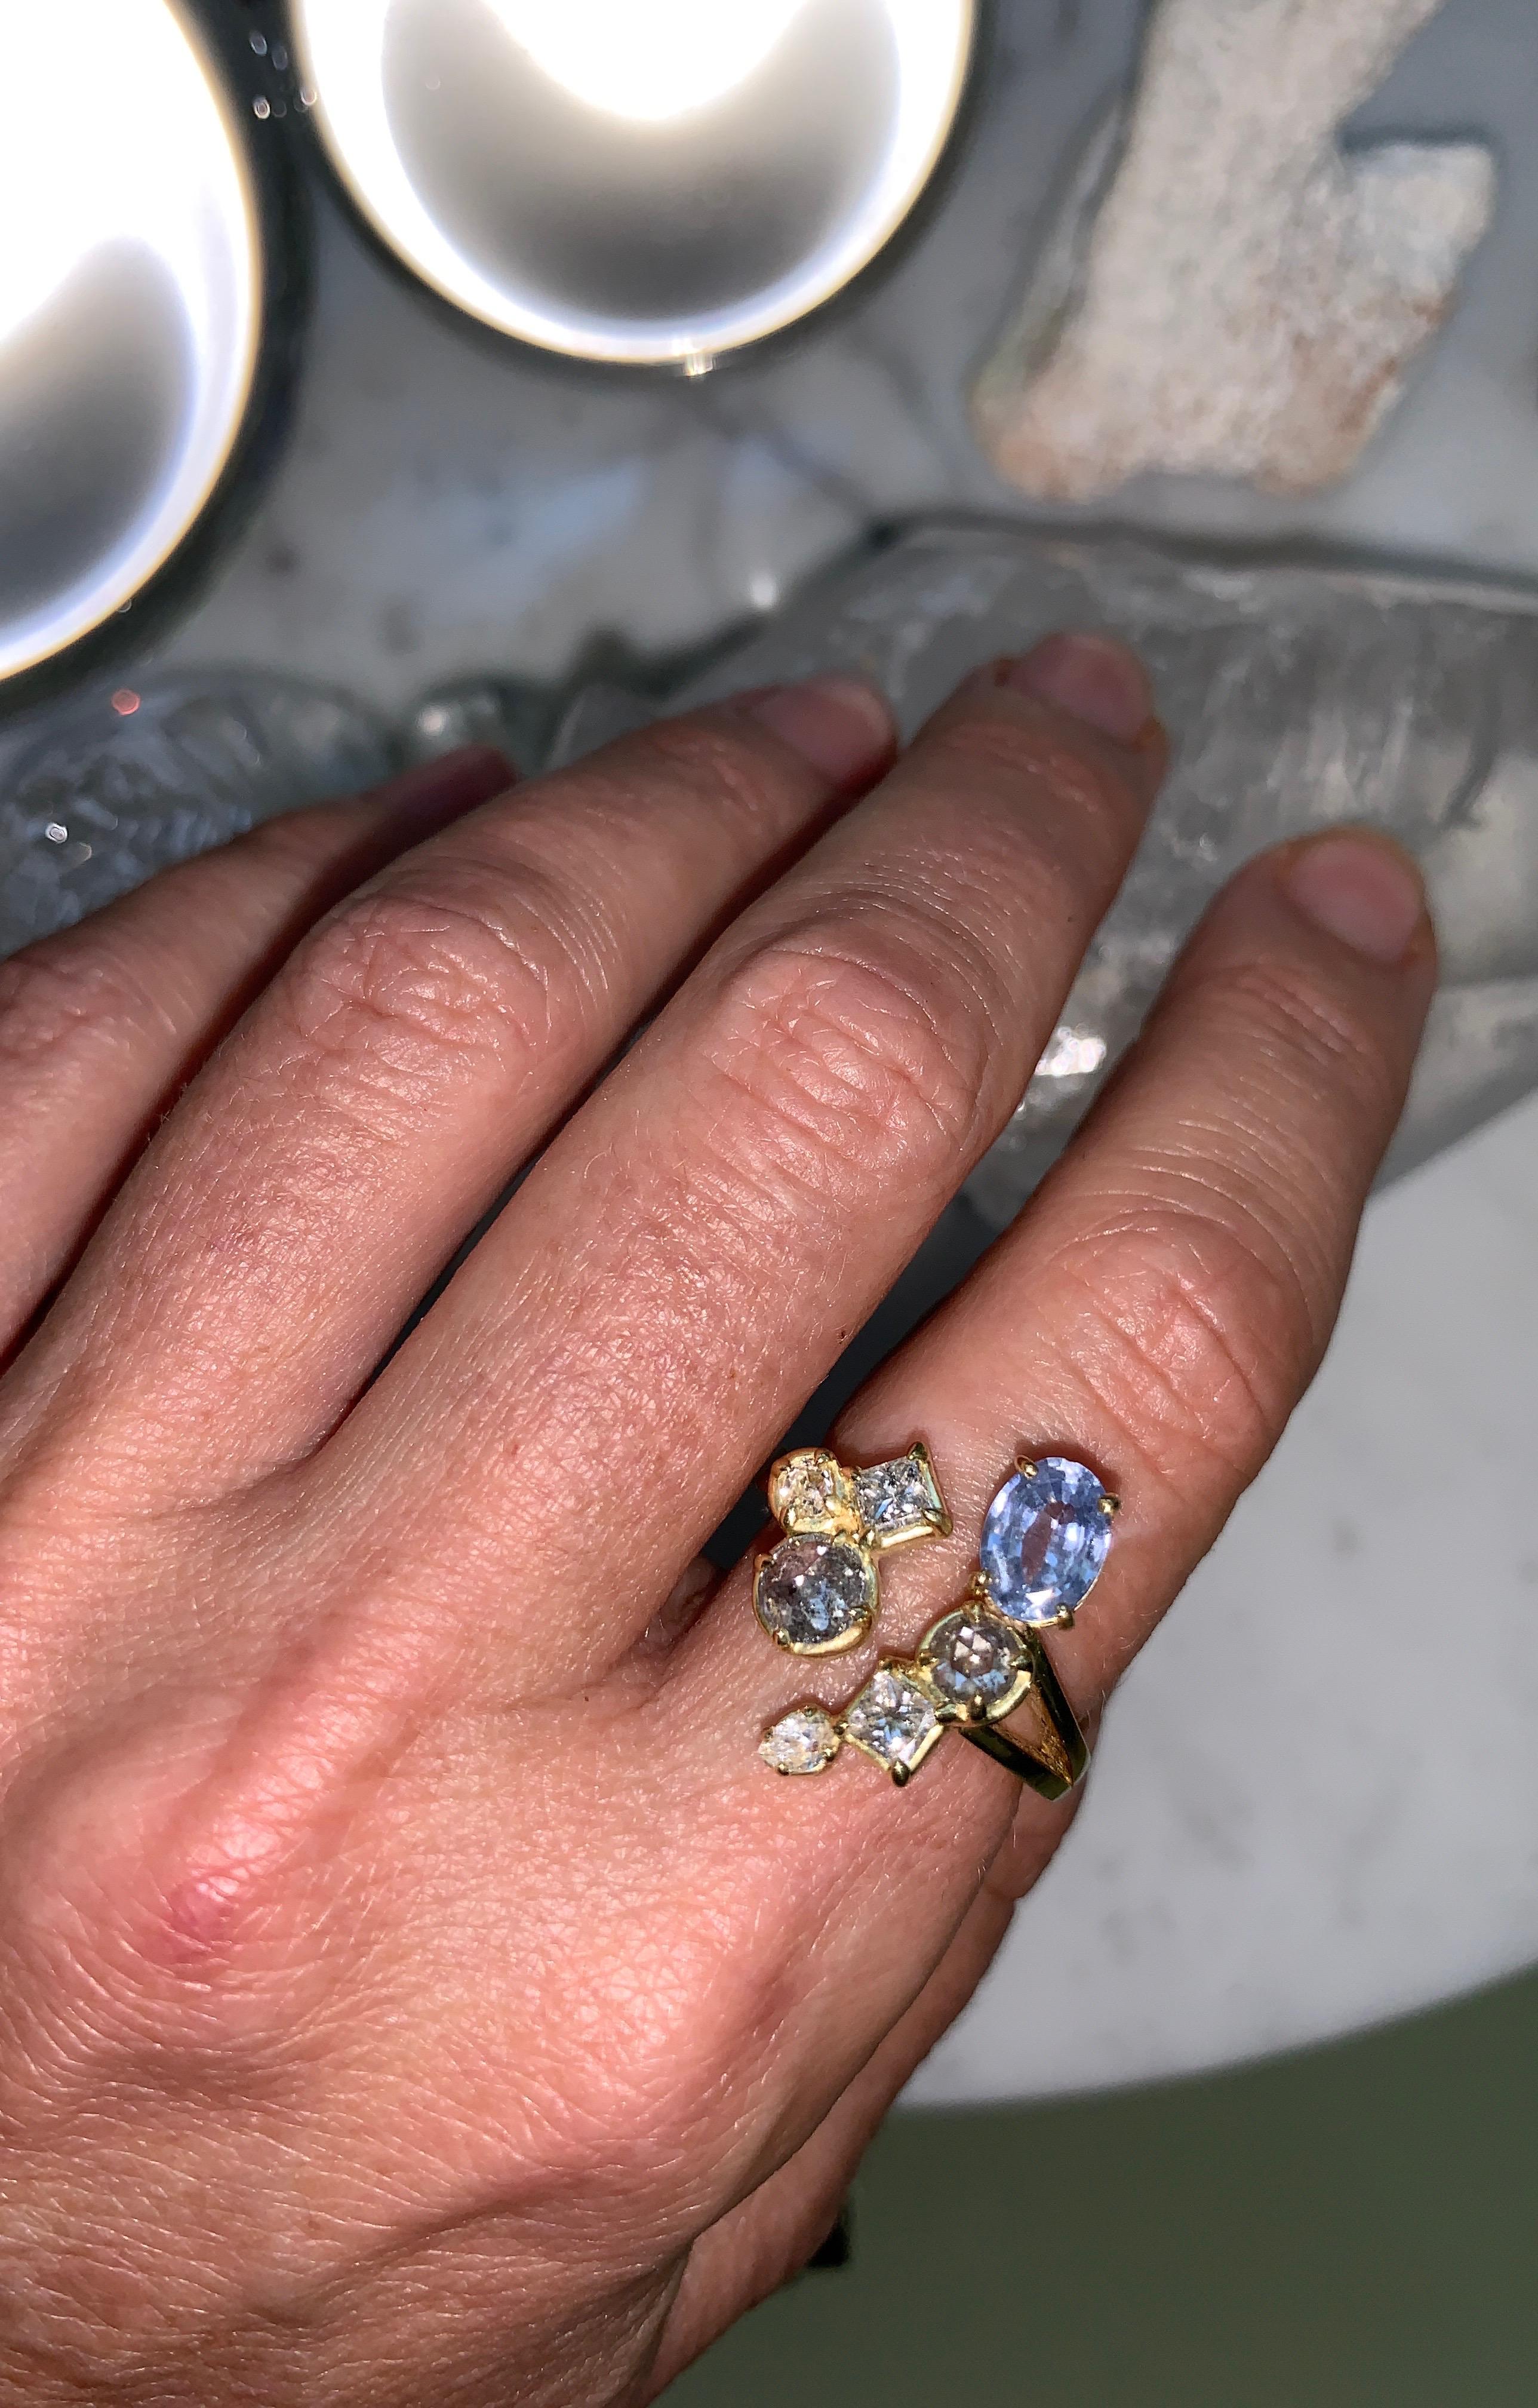 This solid 18 Karat Yellow Gold Ring is made by hand in Los Angeles, CA. It has a large oval Ceylon Blue Sapphire, White, and Grey Diamonds in different shapes. 
This Ring is one of a kind and made by hand using recycled Gold and conflict-free